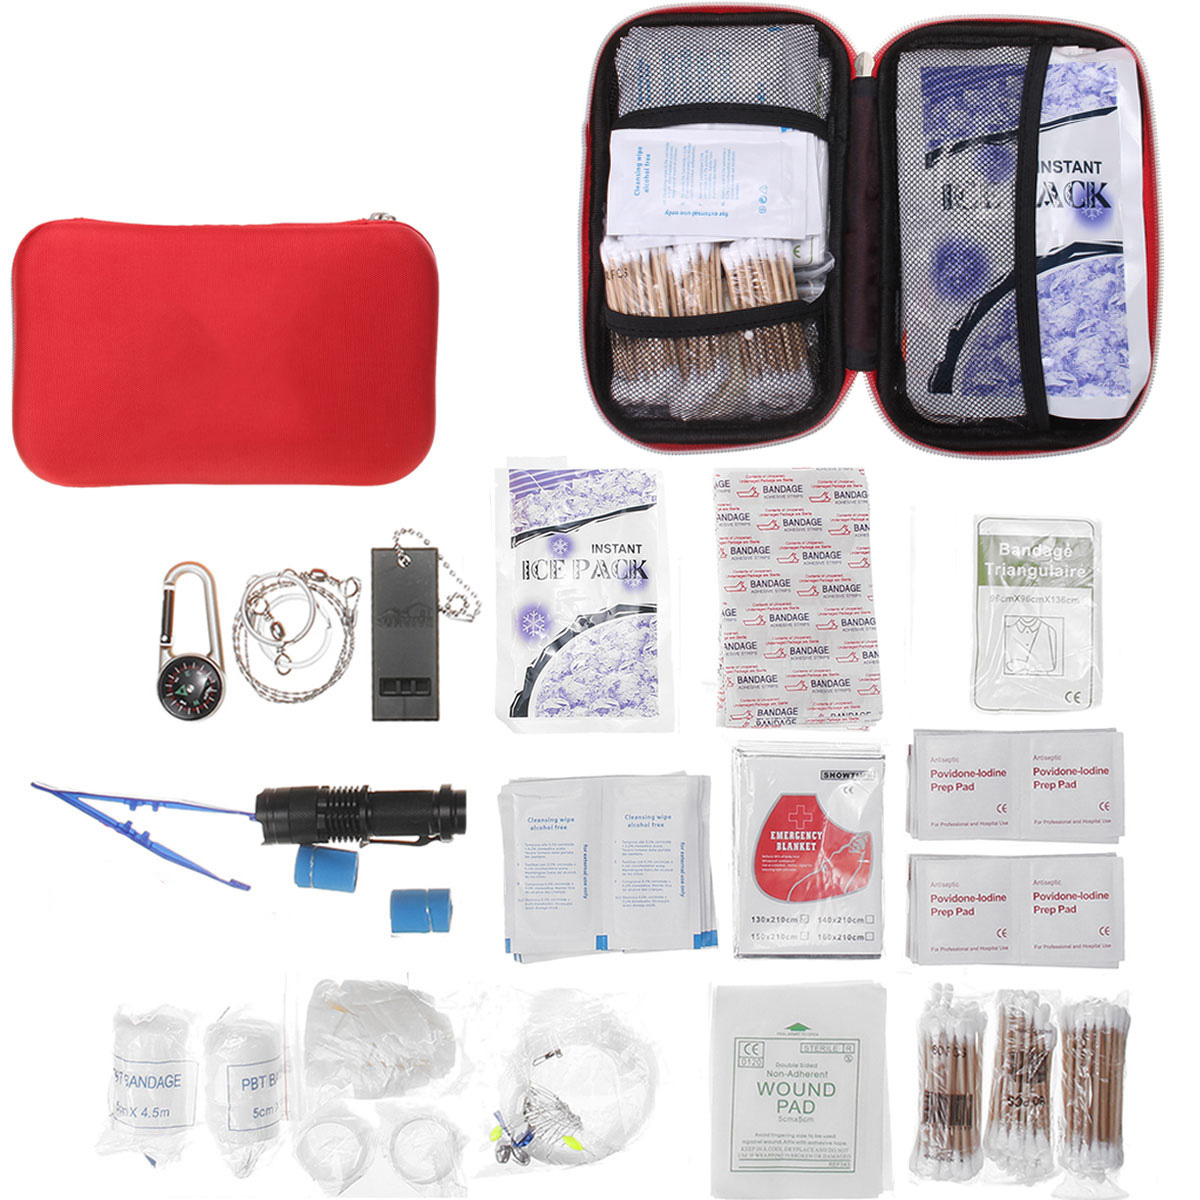 100177243-Pcs-First-Aid-Kit-Survival-Tactical-Emergency-Equipment-with-Fishing-Tackle-Lifeguard-Blan-1809173-4